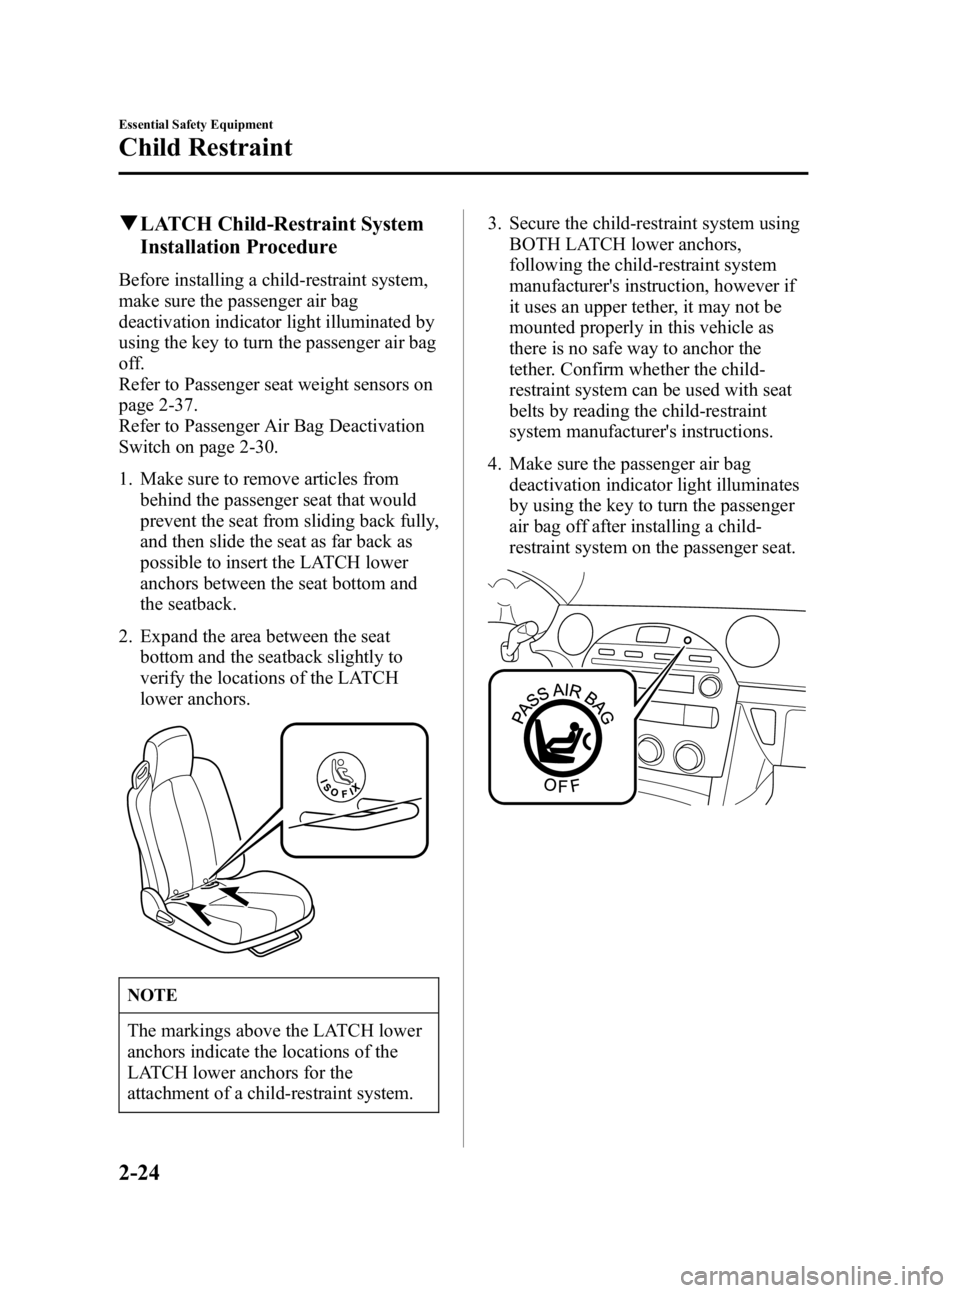 MAZDA MODEL MX-5 MIATA 2006  Owners Manual Black plate (36,1)
qLATCH Child-Restraint System
Installation Procedure
Before installing a child-restraint system,
make sure the passenger air bag
deactivation indicator light illuminated by
using th